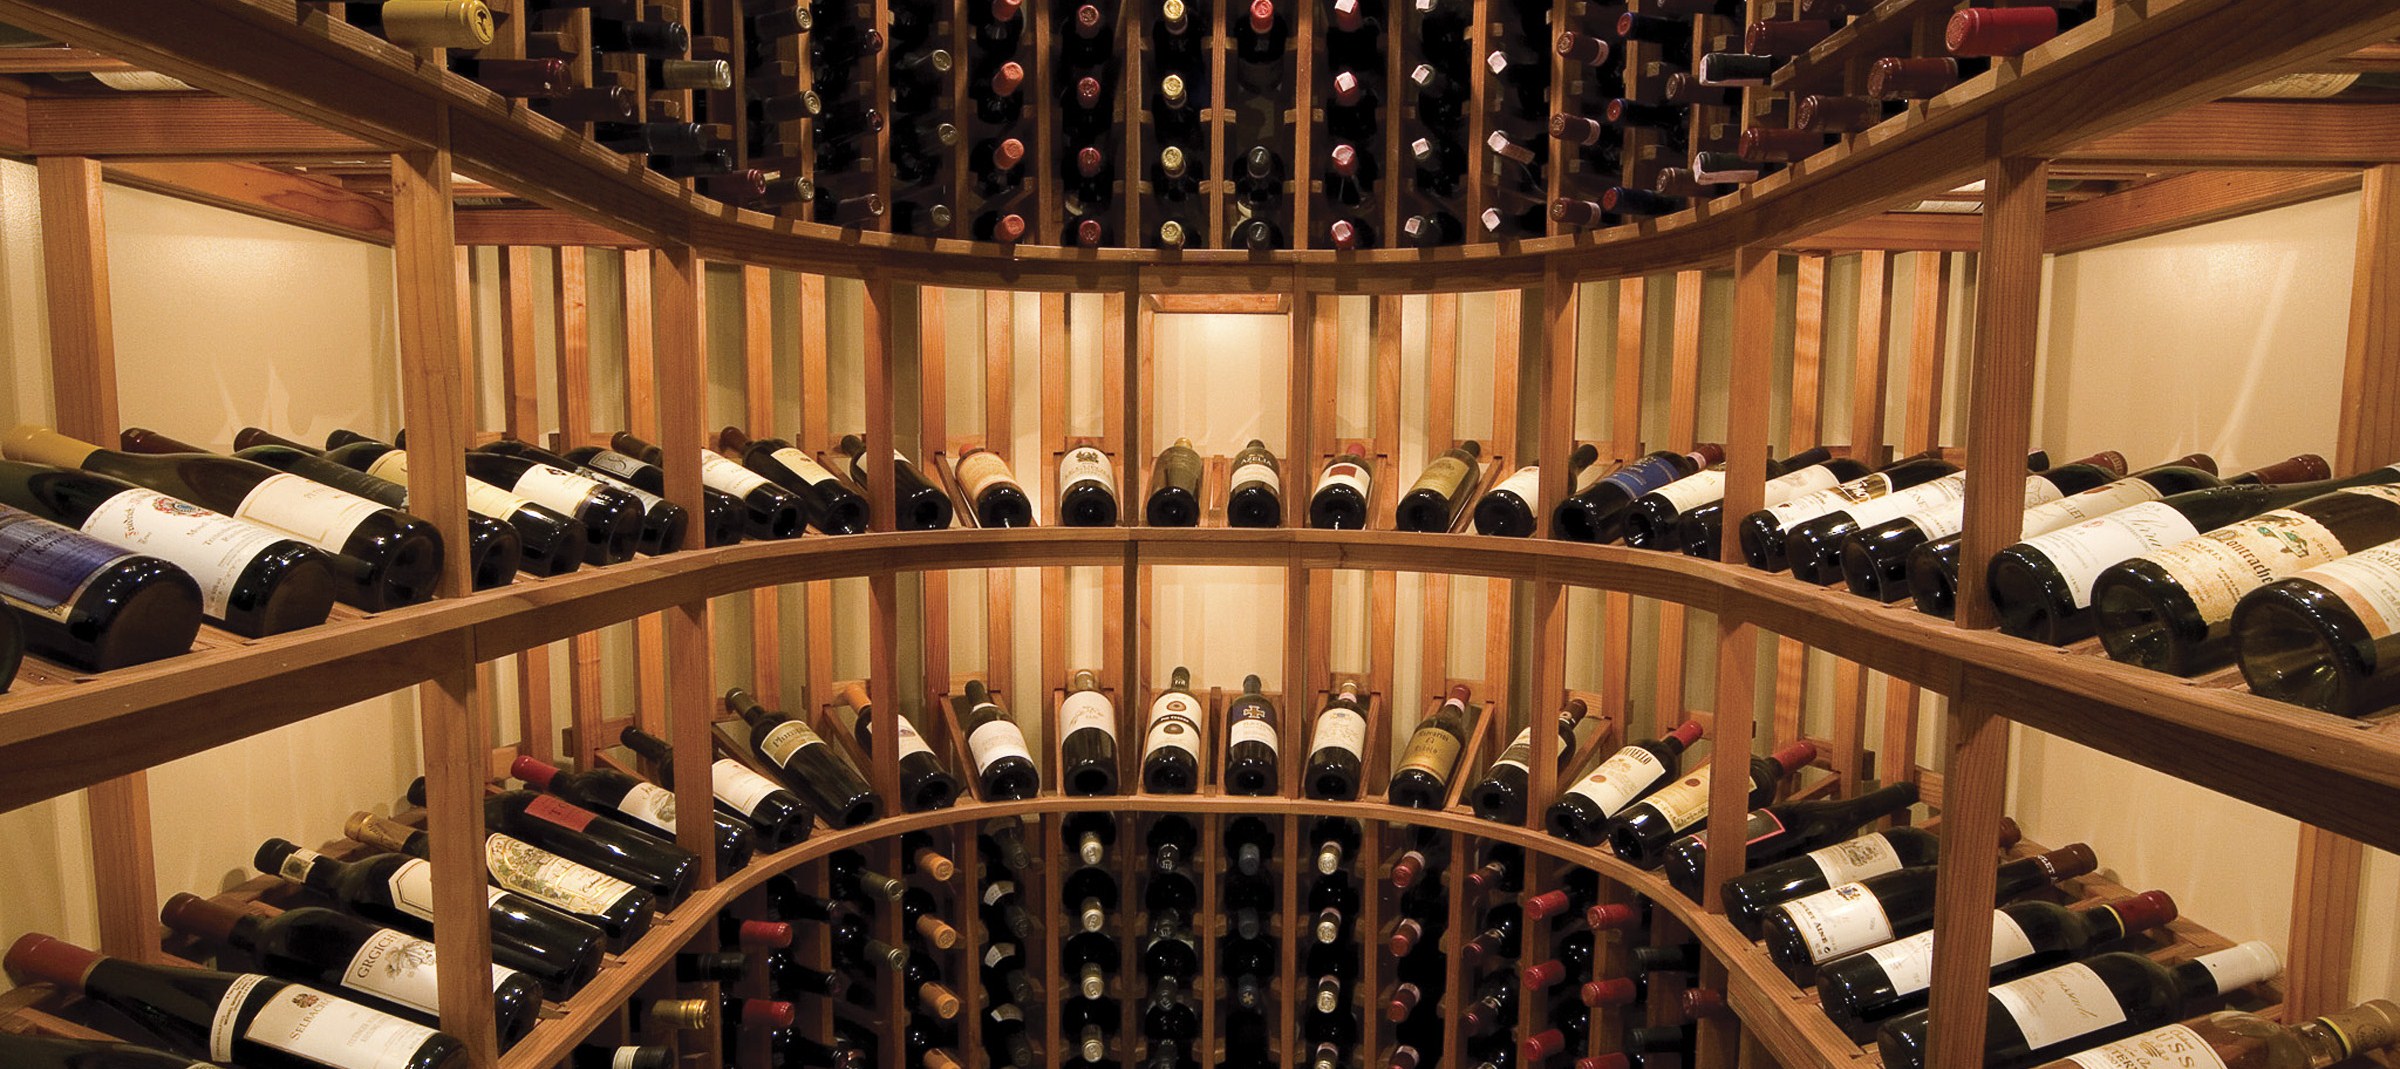 Wine Cellar Backgrounds on Wallpapers Vista